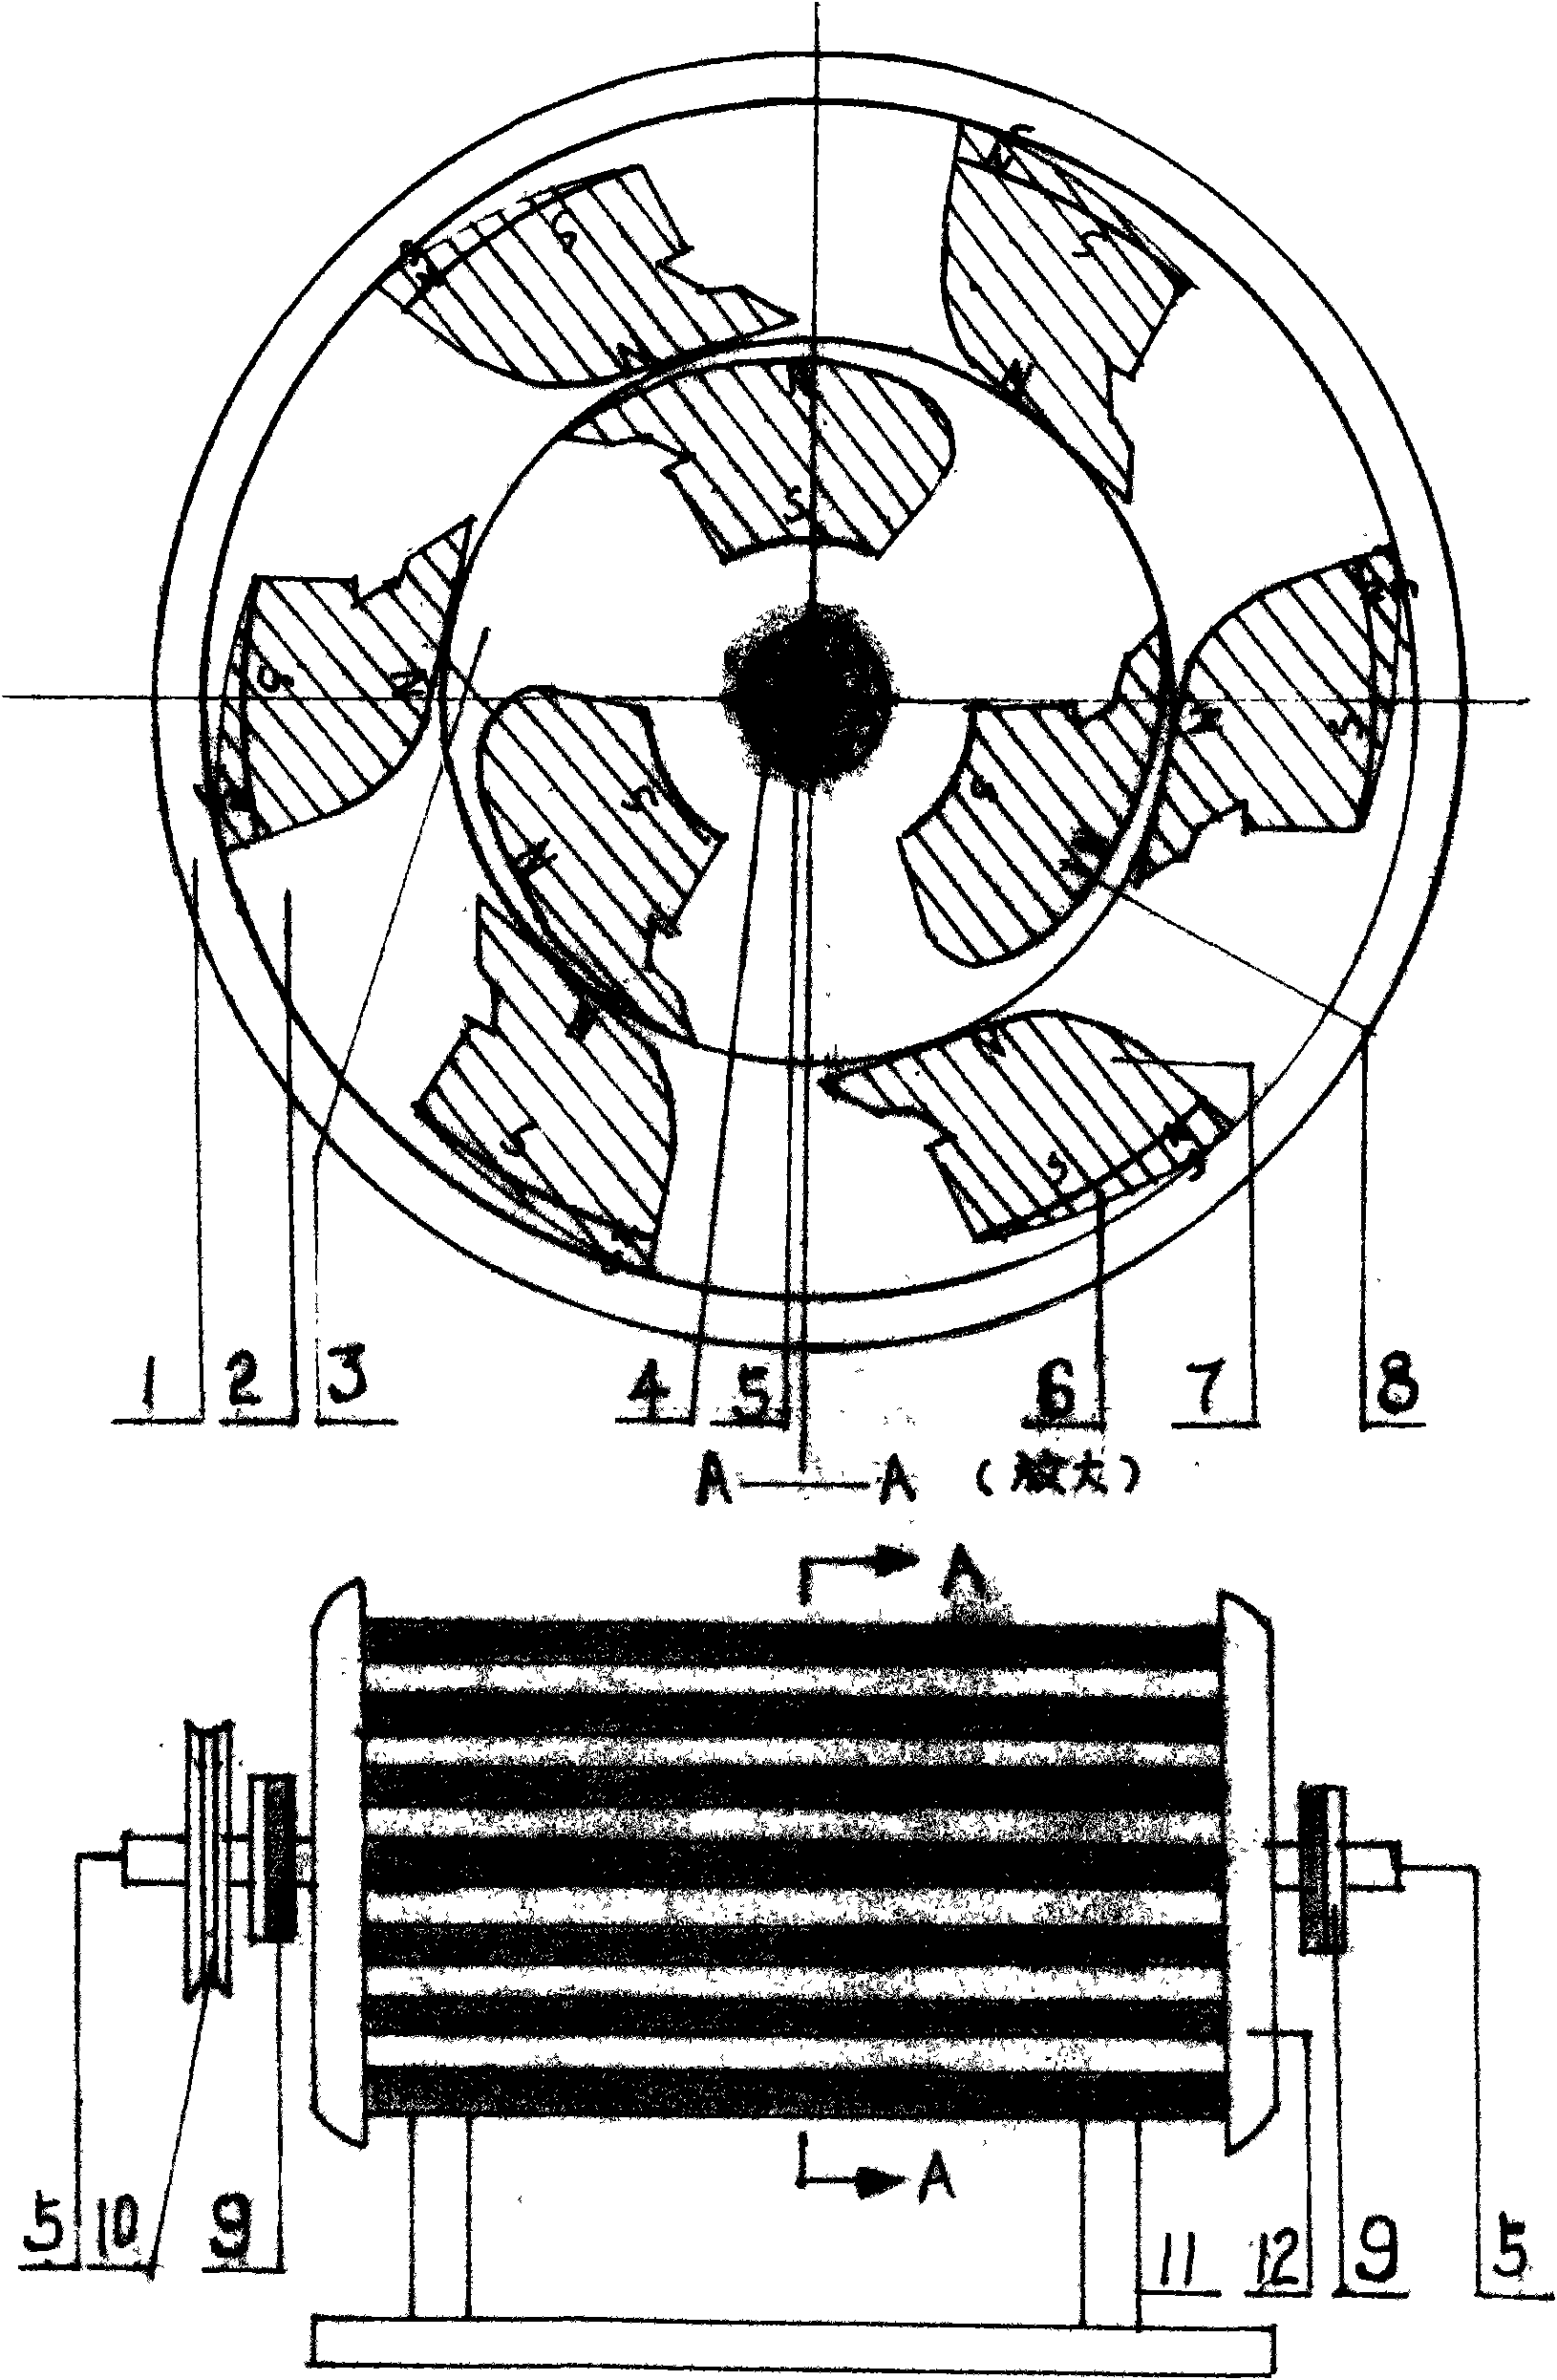 Direct-repelling type permanent magnet rotary engine